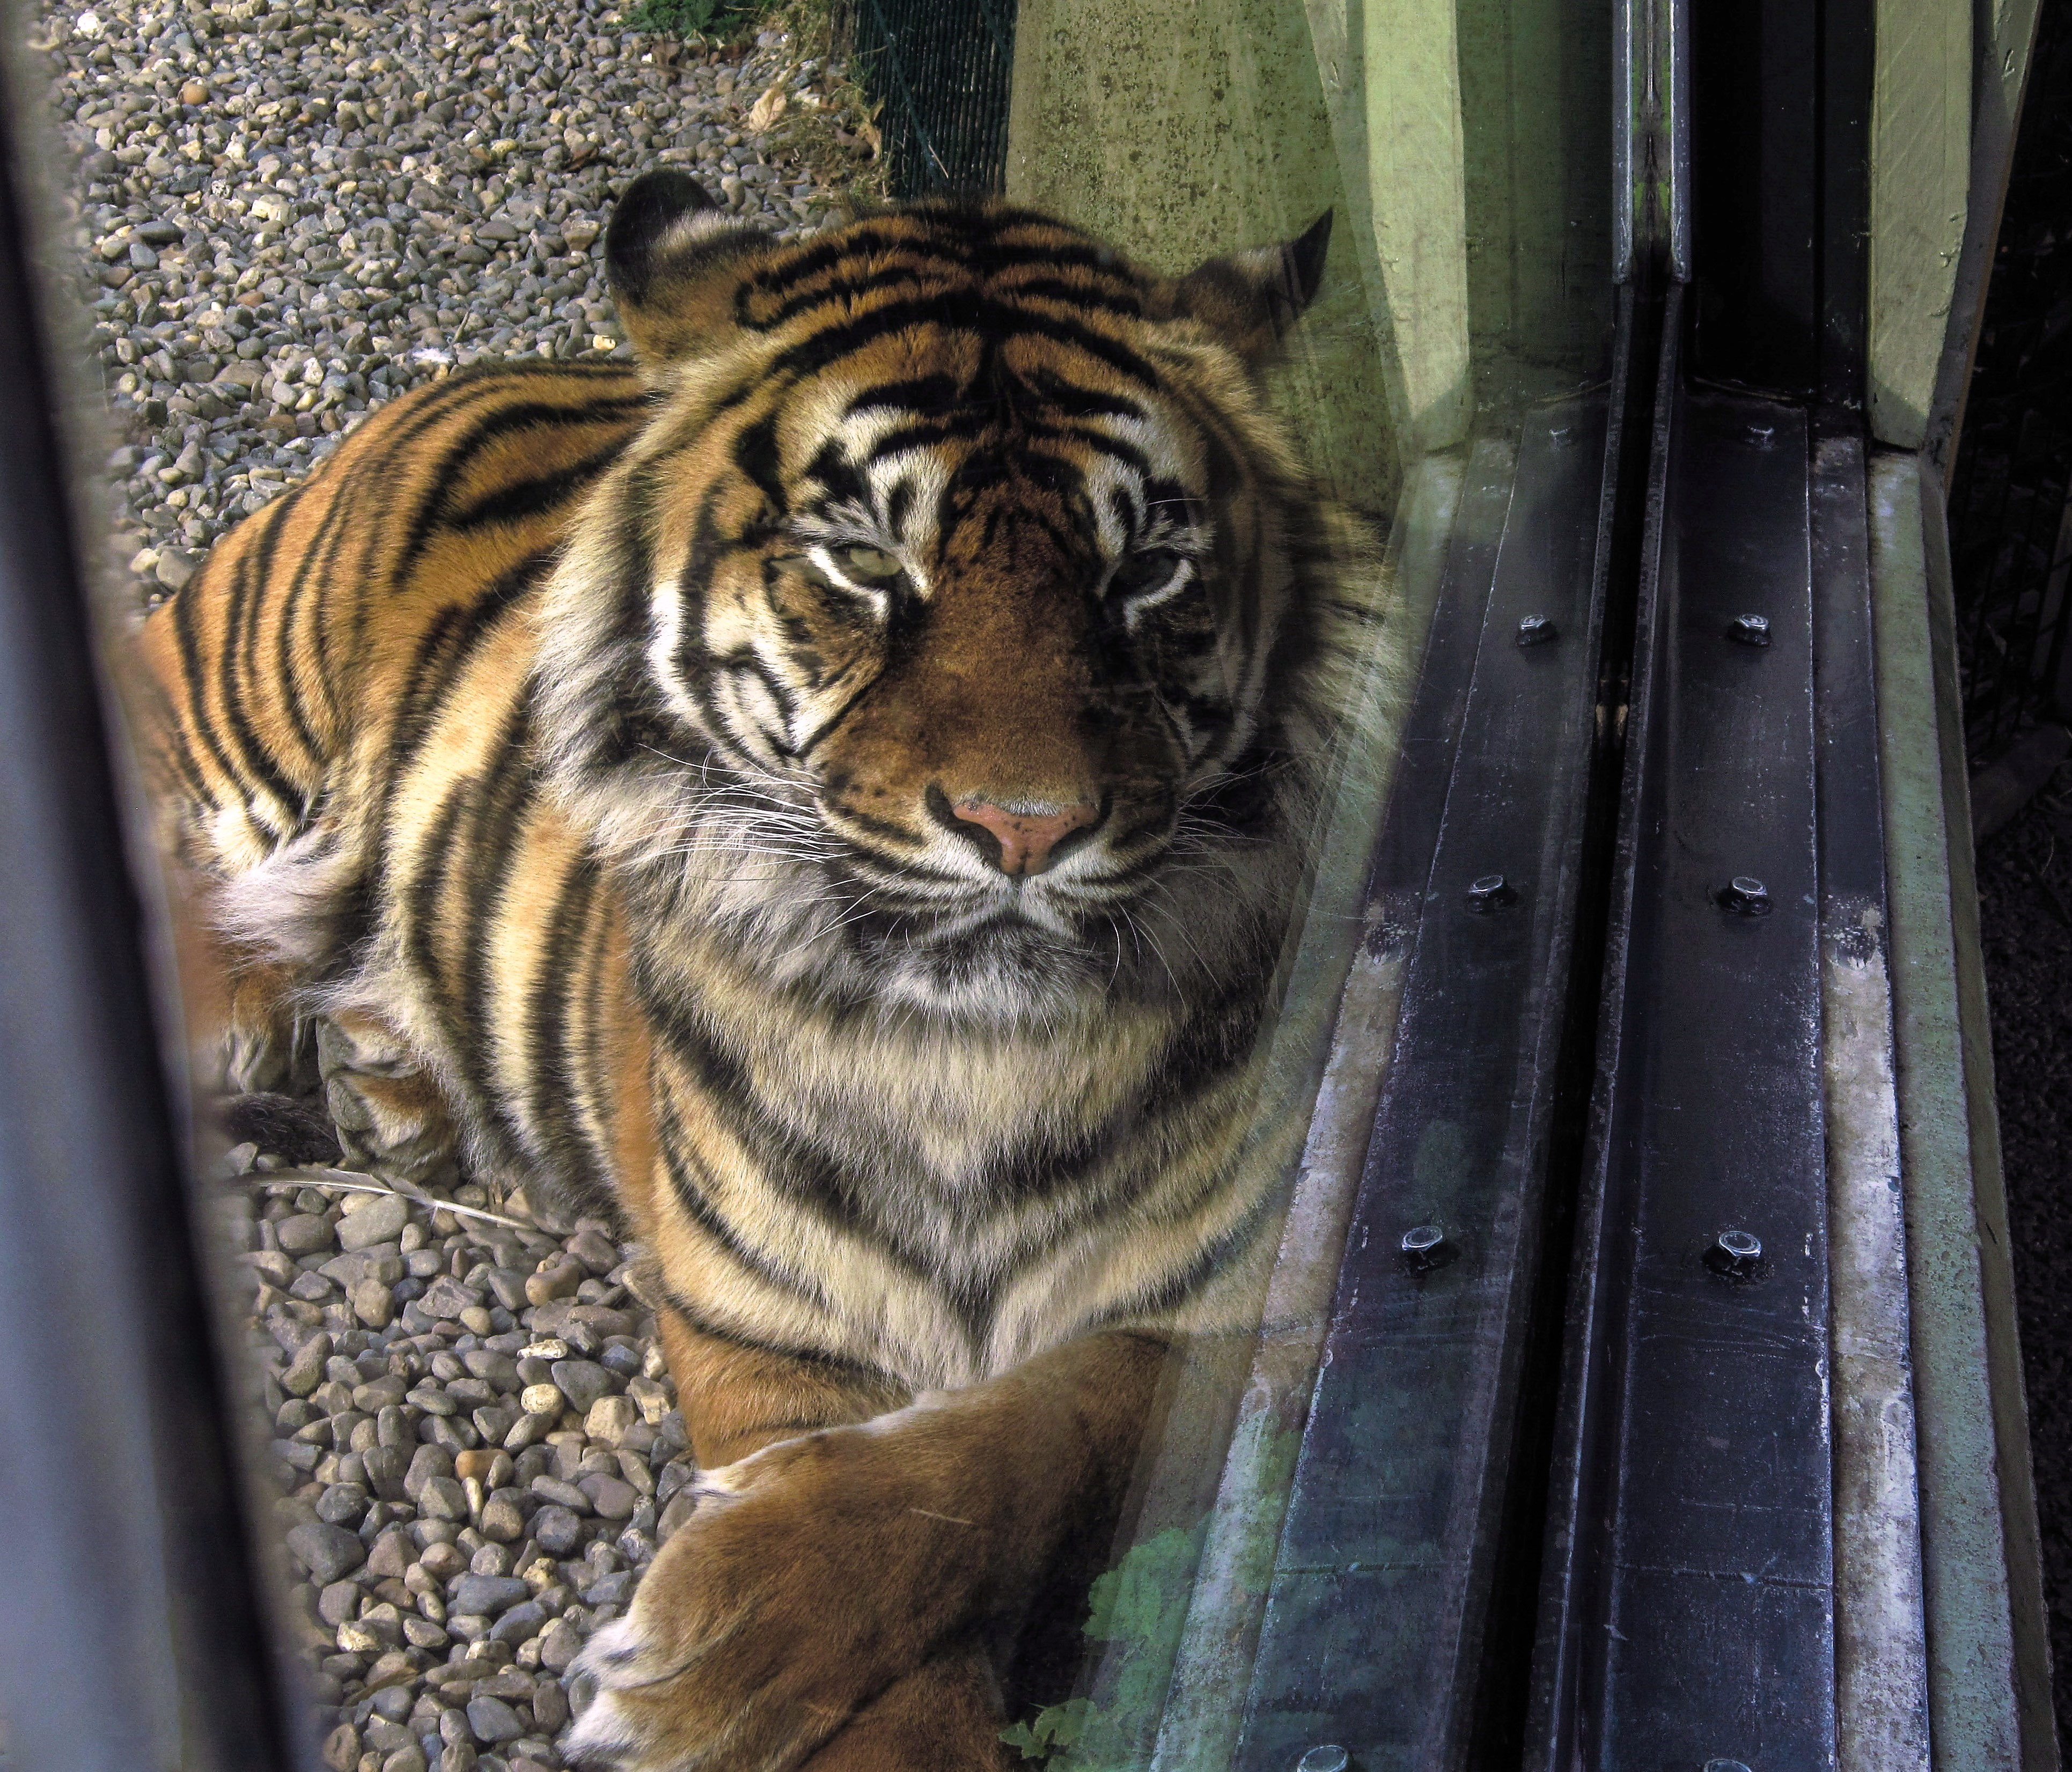 Asia Pulp & Paper - #DidYouKnow Sumatran tiger are the shortest in